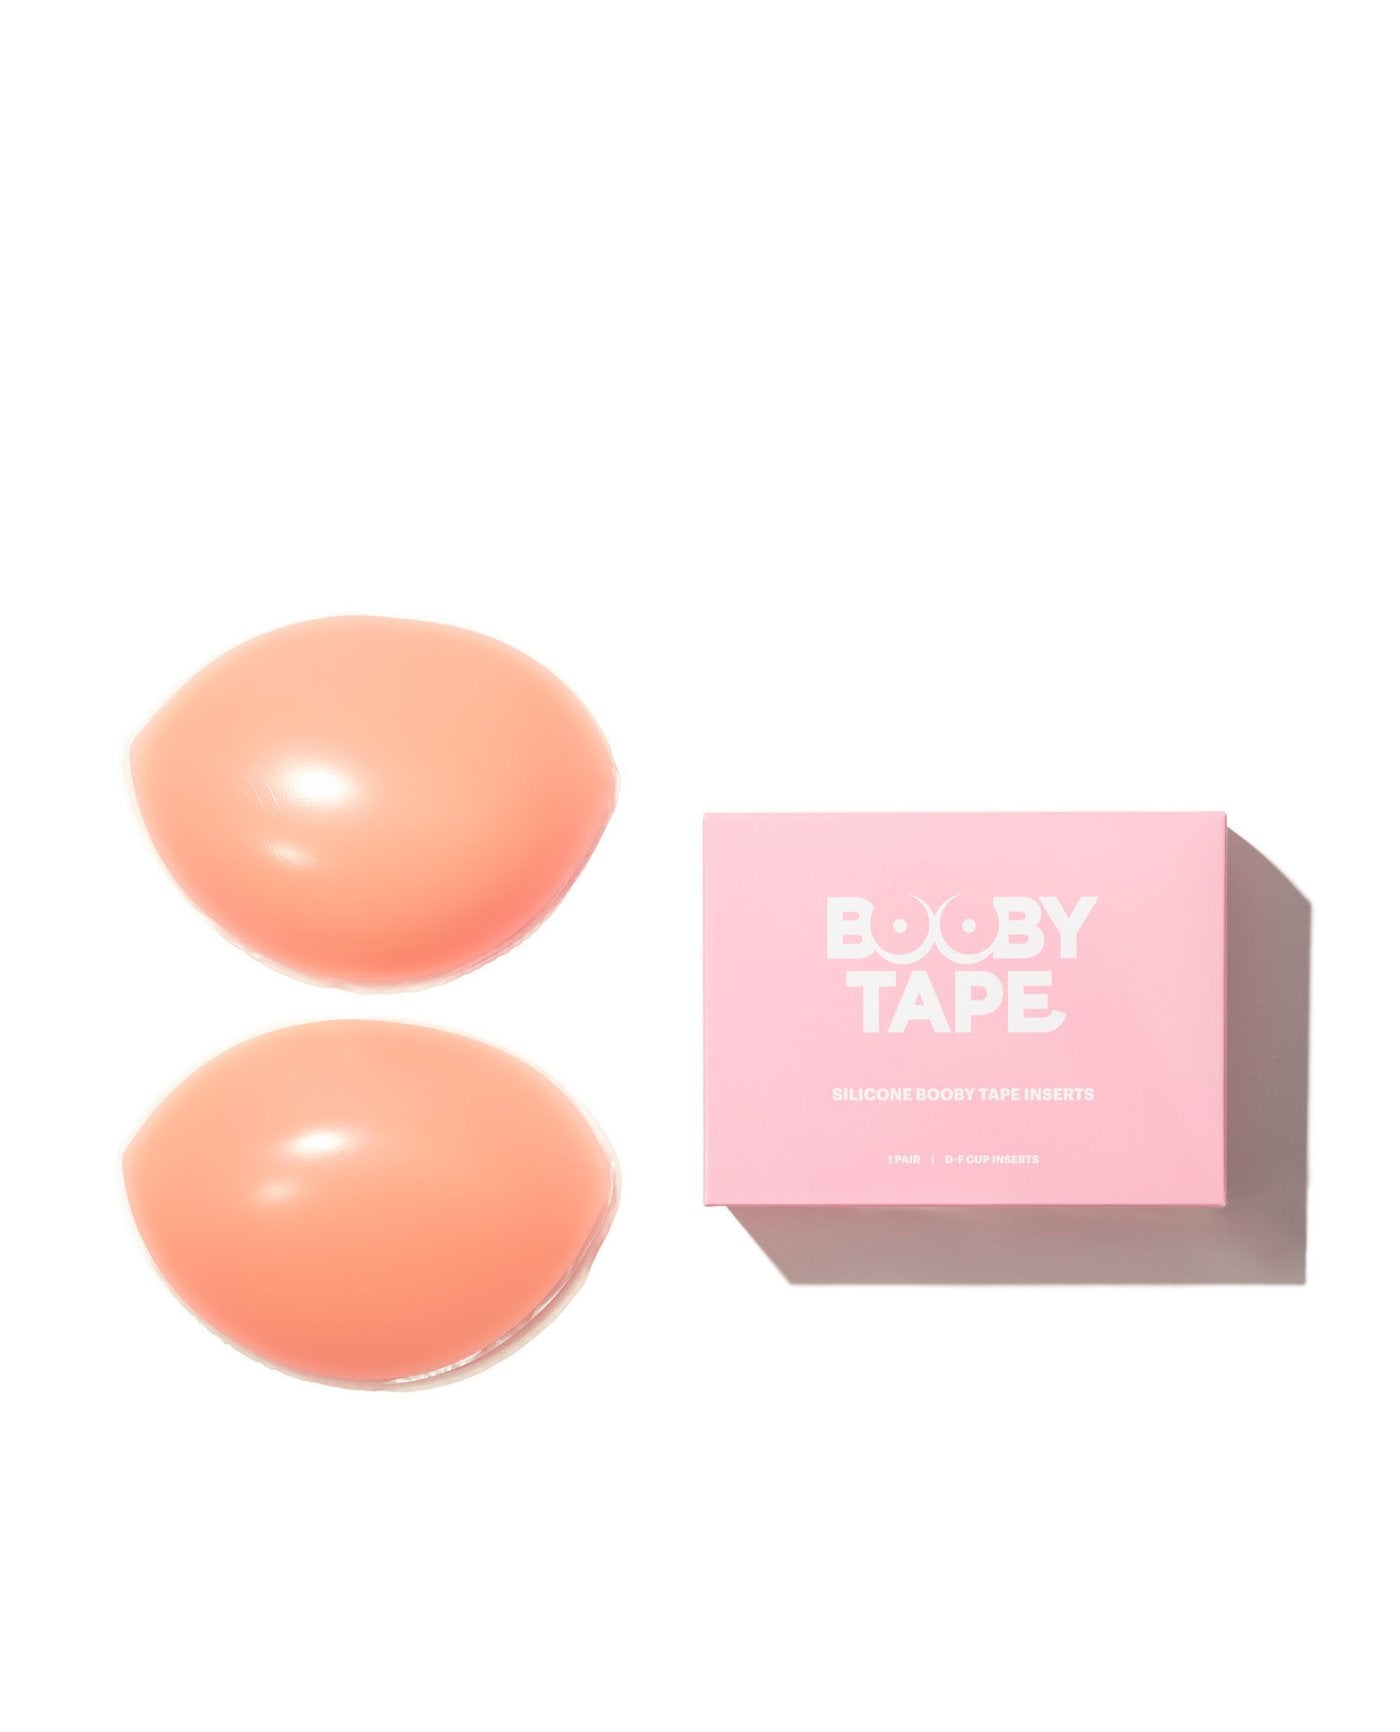 Silicone Booby Tape Inserts (D-F)